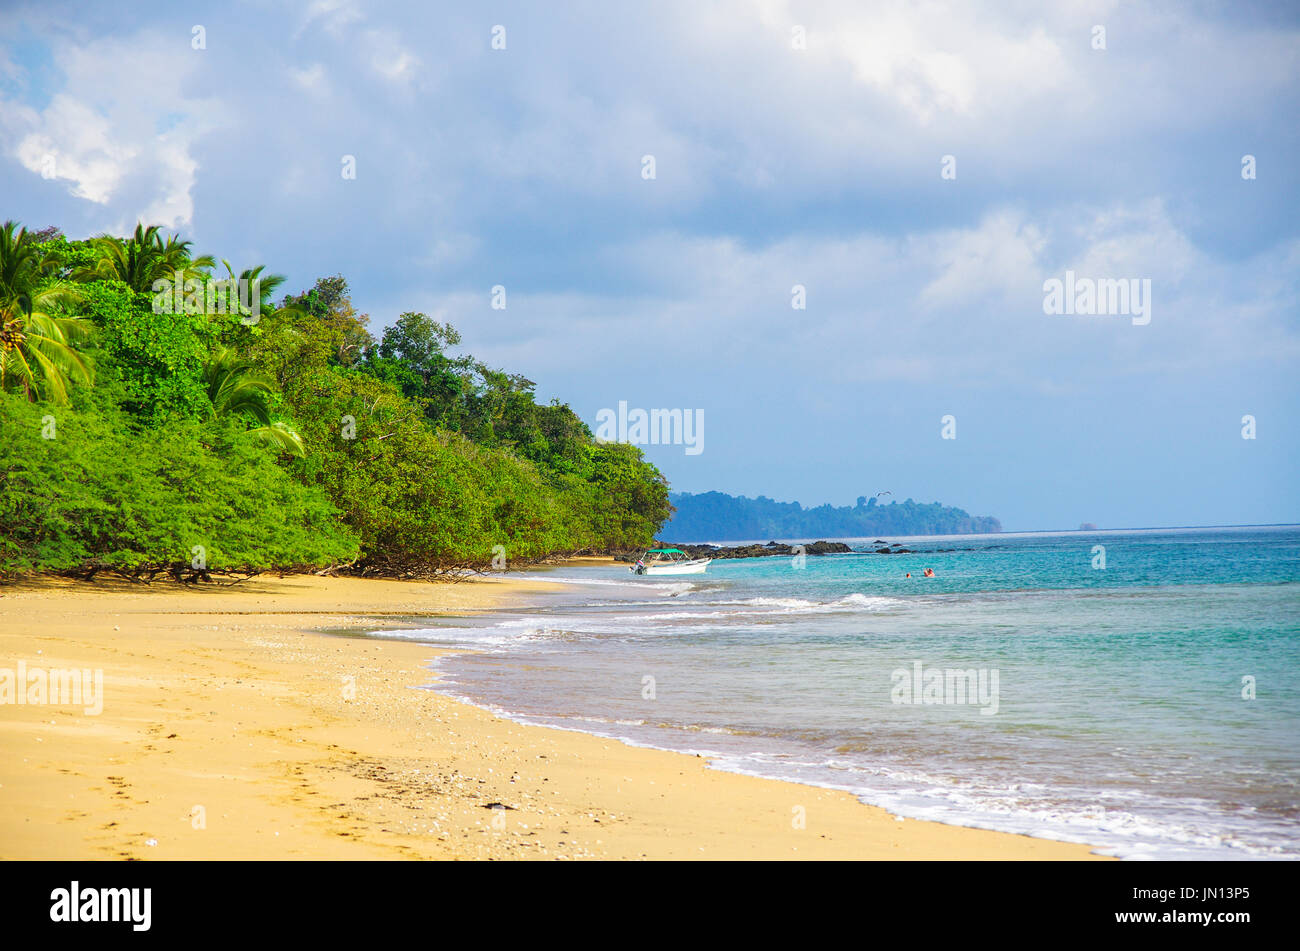 Beach scene images from coiba island national nature park in Panama Stock Photo